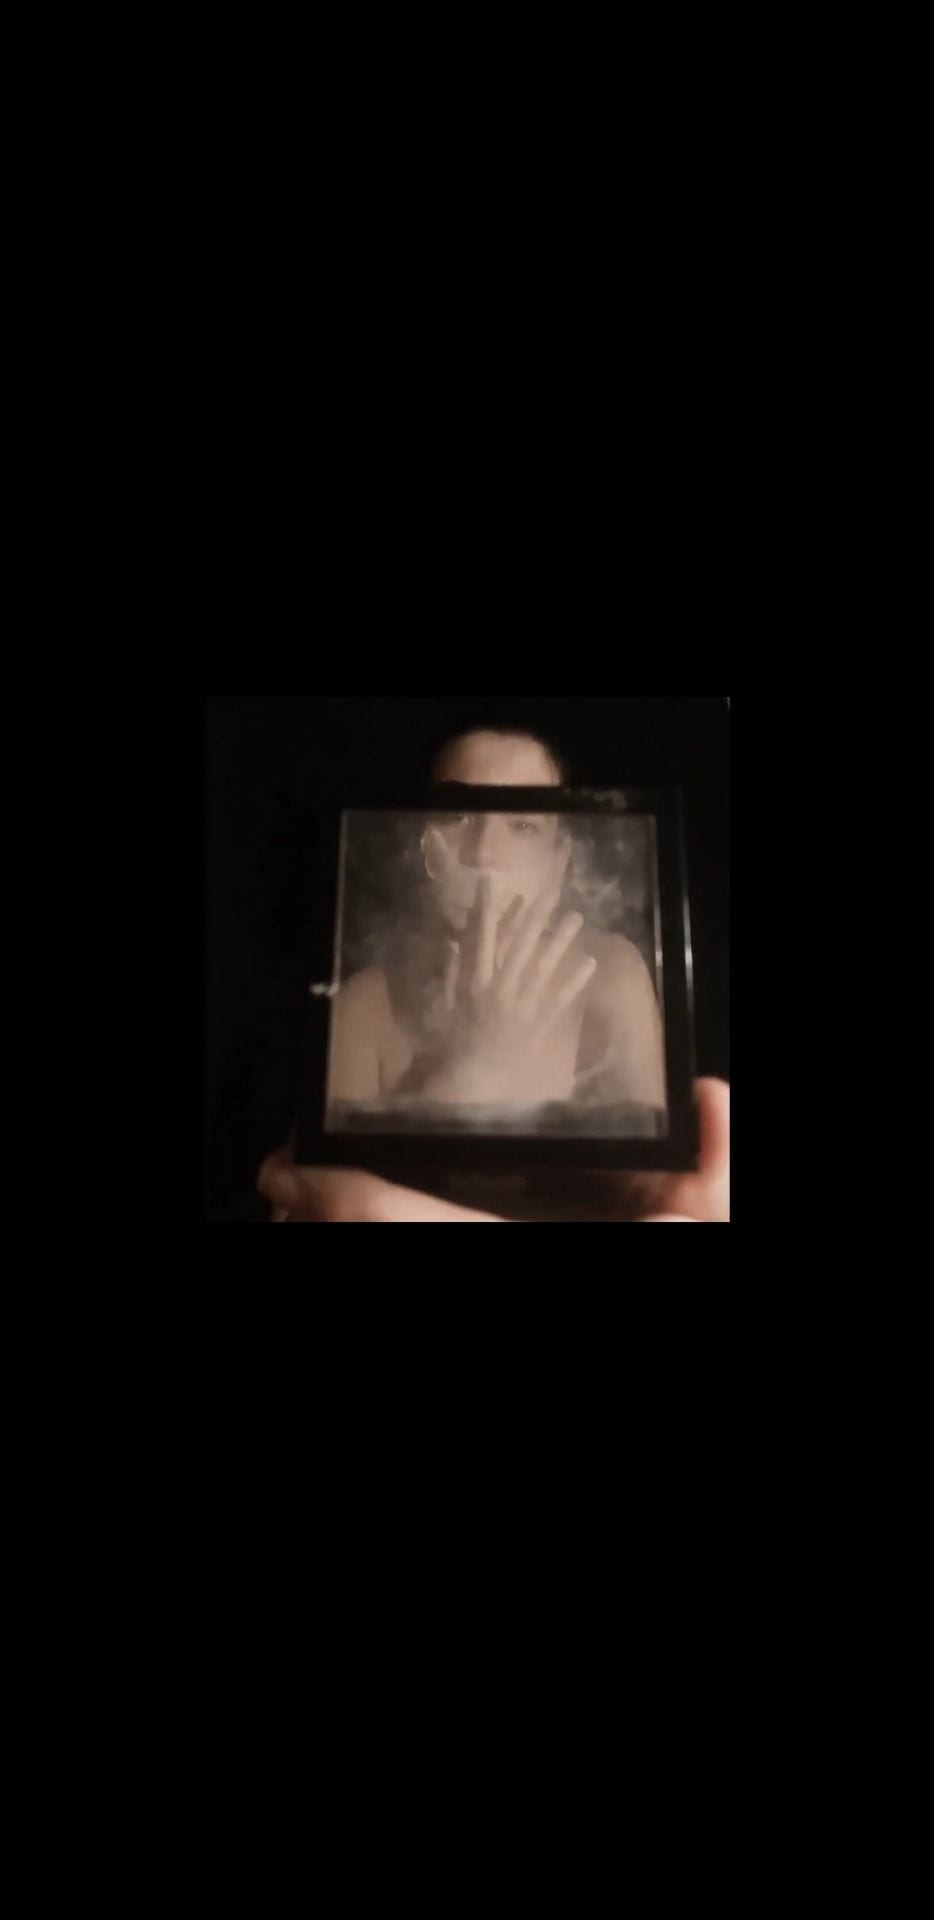 Someone holding their hand in front of their face, shot through a piece of glass.